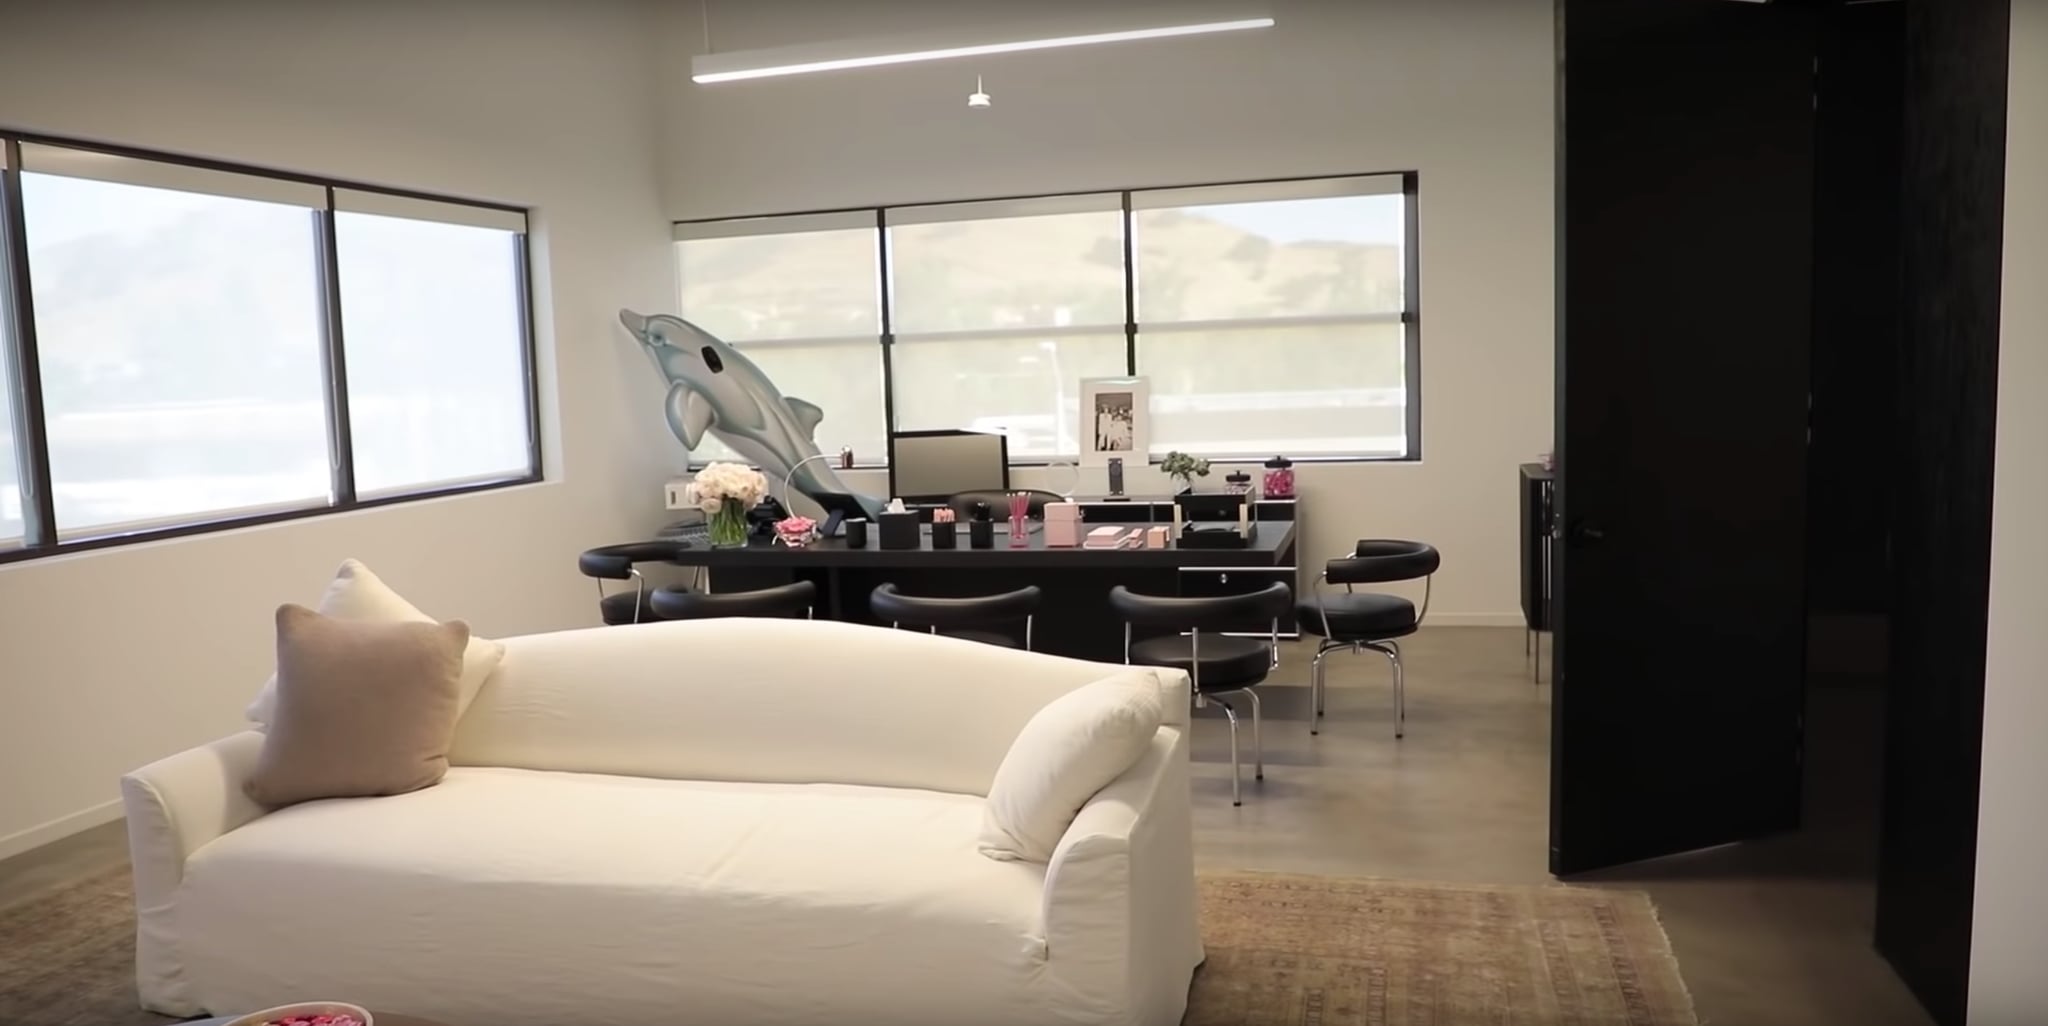 Kylie Jenner Gives a Tour of Her Glam Kylie Cosmetics Office | POPSUGAR  Money & Career